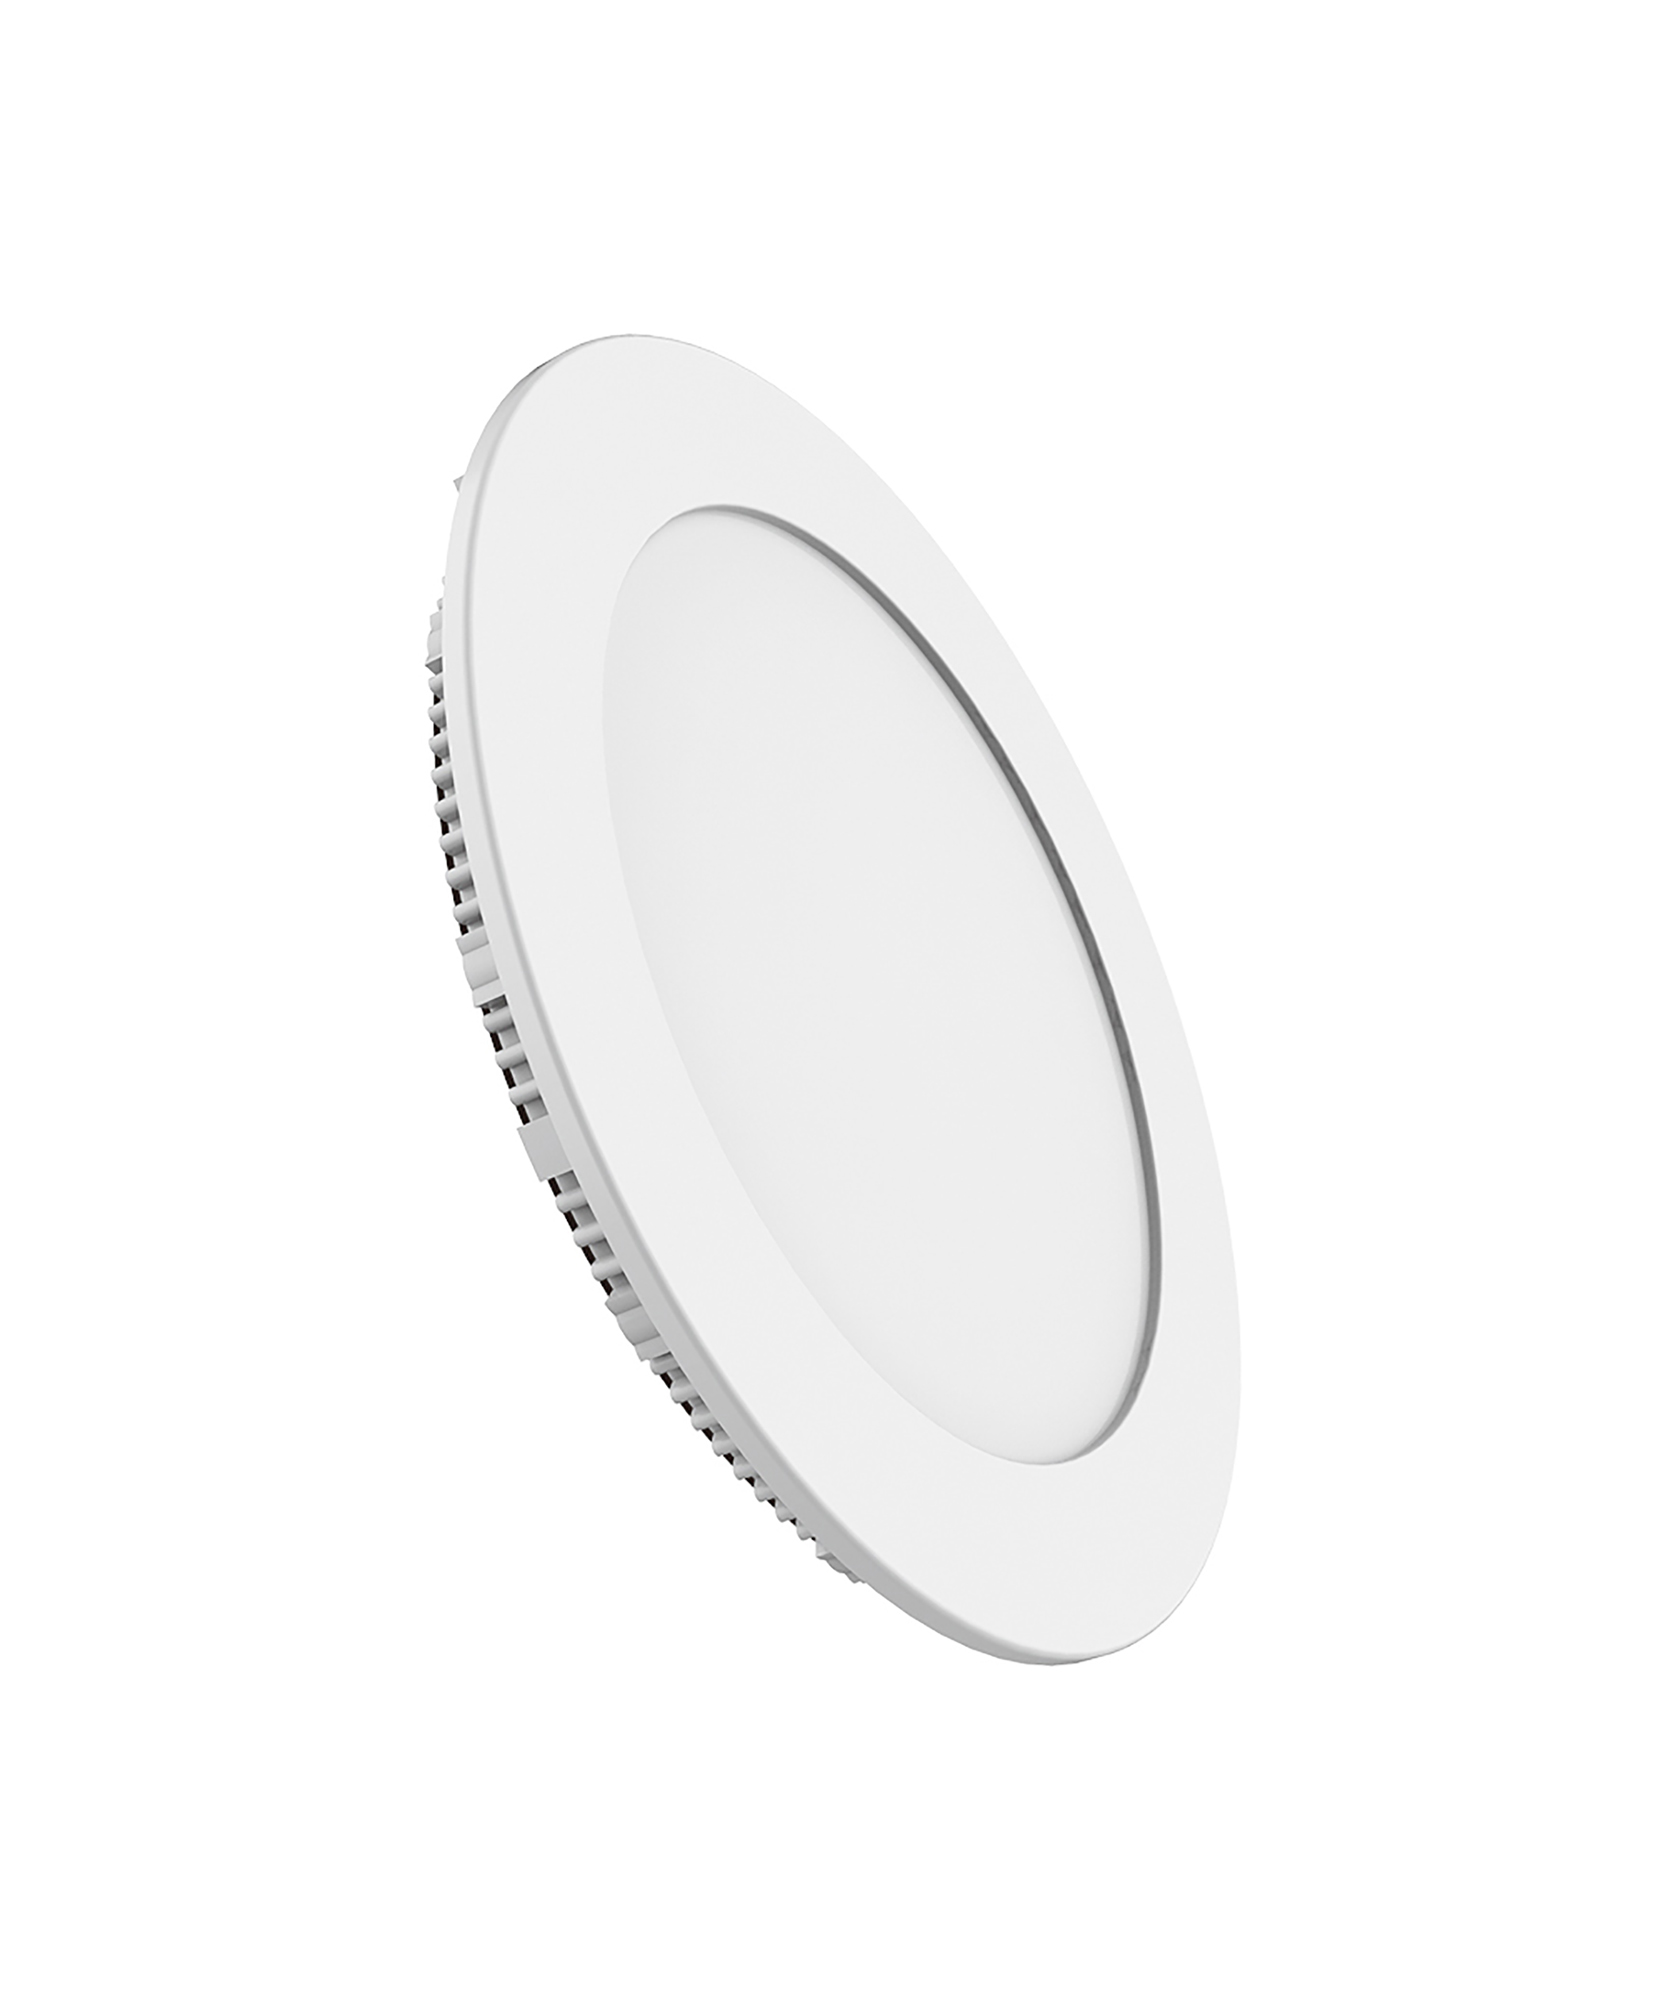 2061830010  Intego R Supervision Slim Recessed Round 300mm (12") 24W, 6400K, 120°, Cut-Out 280mm